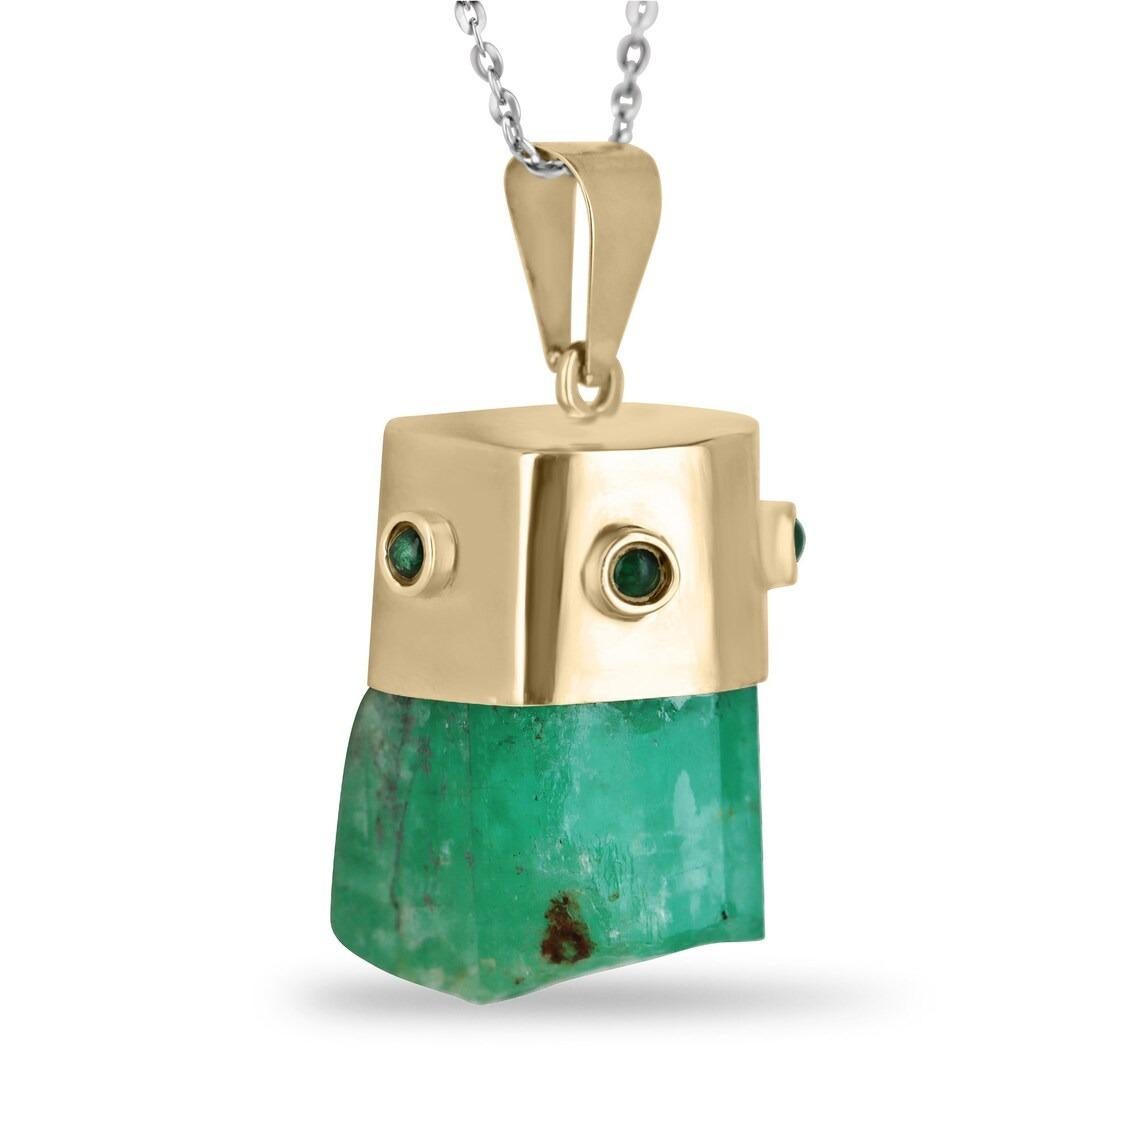 Showcased is a natural, rough emerald crystal pendant. An estimated 76 total carat weight of genuine, rough, Colombian emerald crystal is beautifully set in a hand-made 14K yellow gold cap. The Colombian emerald has a rich, medium-green color and